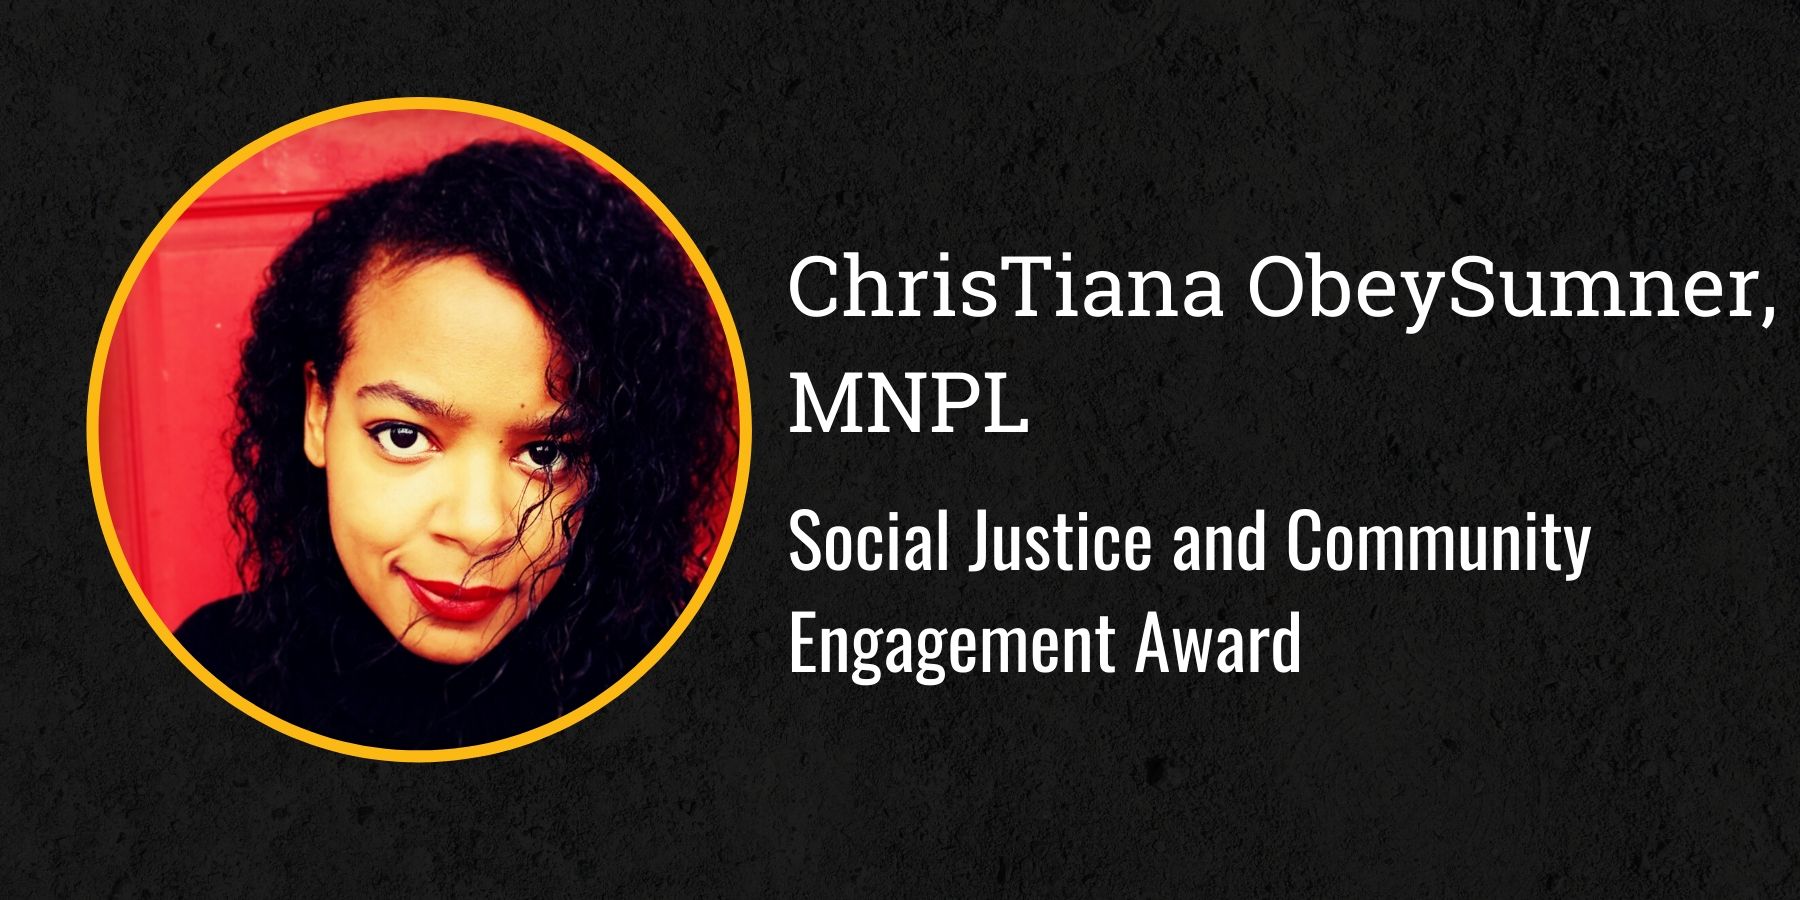 Photo of ChrisTiane ObeySumner and text Social Justice and Community Engagement Award